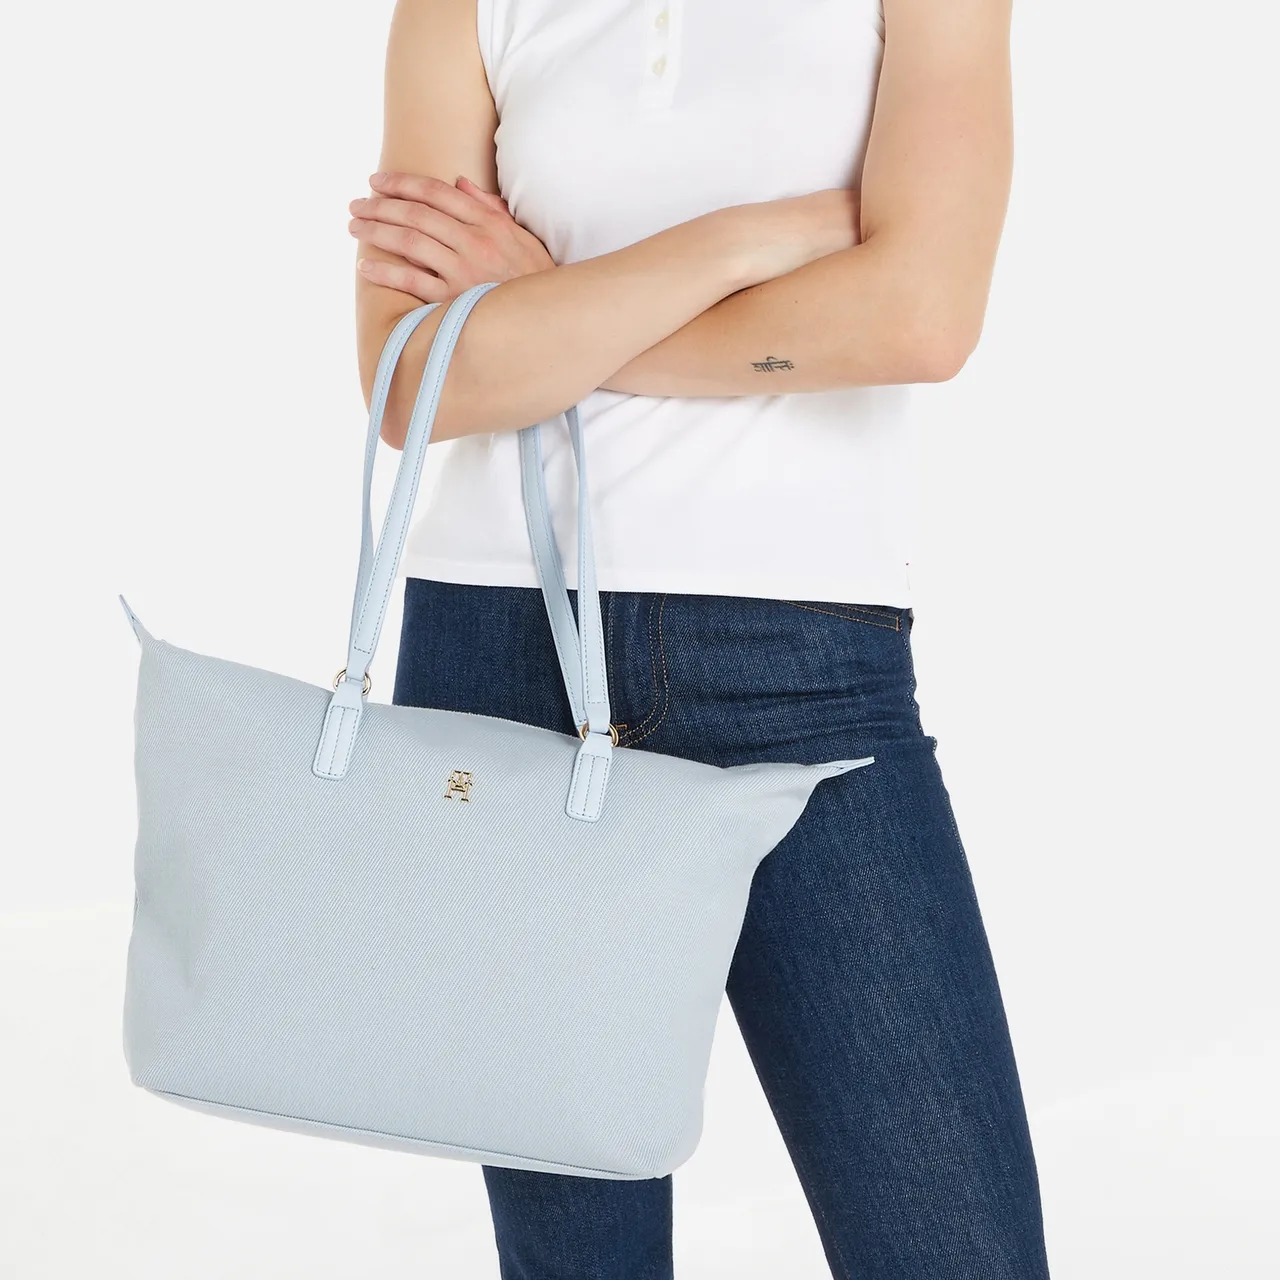 Tommy Hilfiger Poppy Canvas Tote Bag